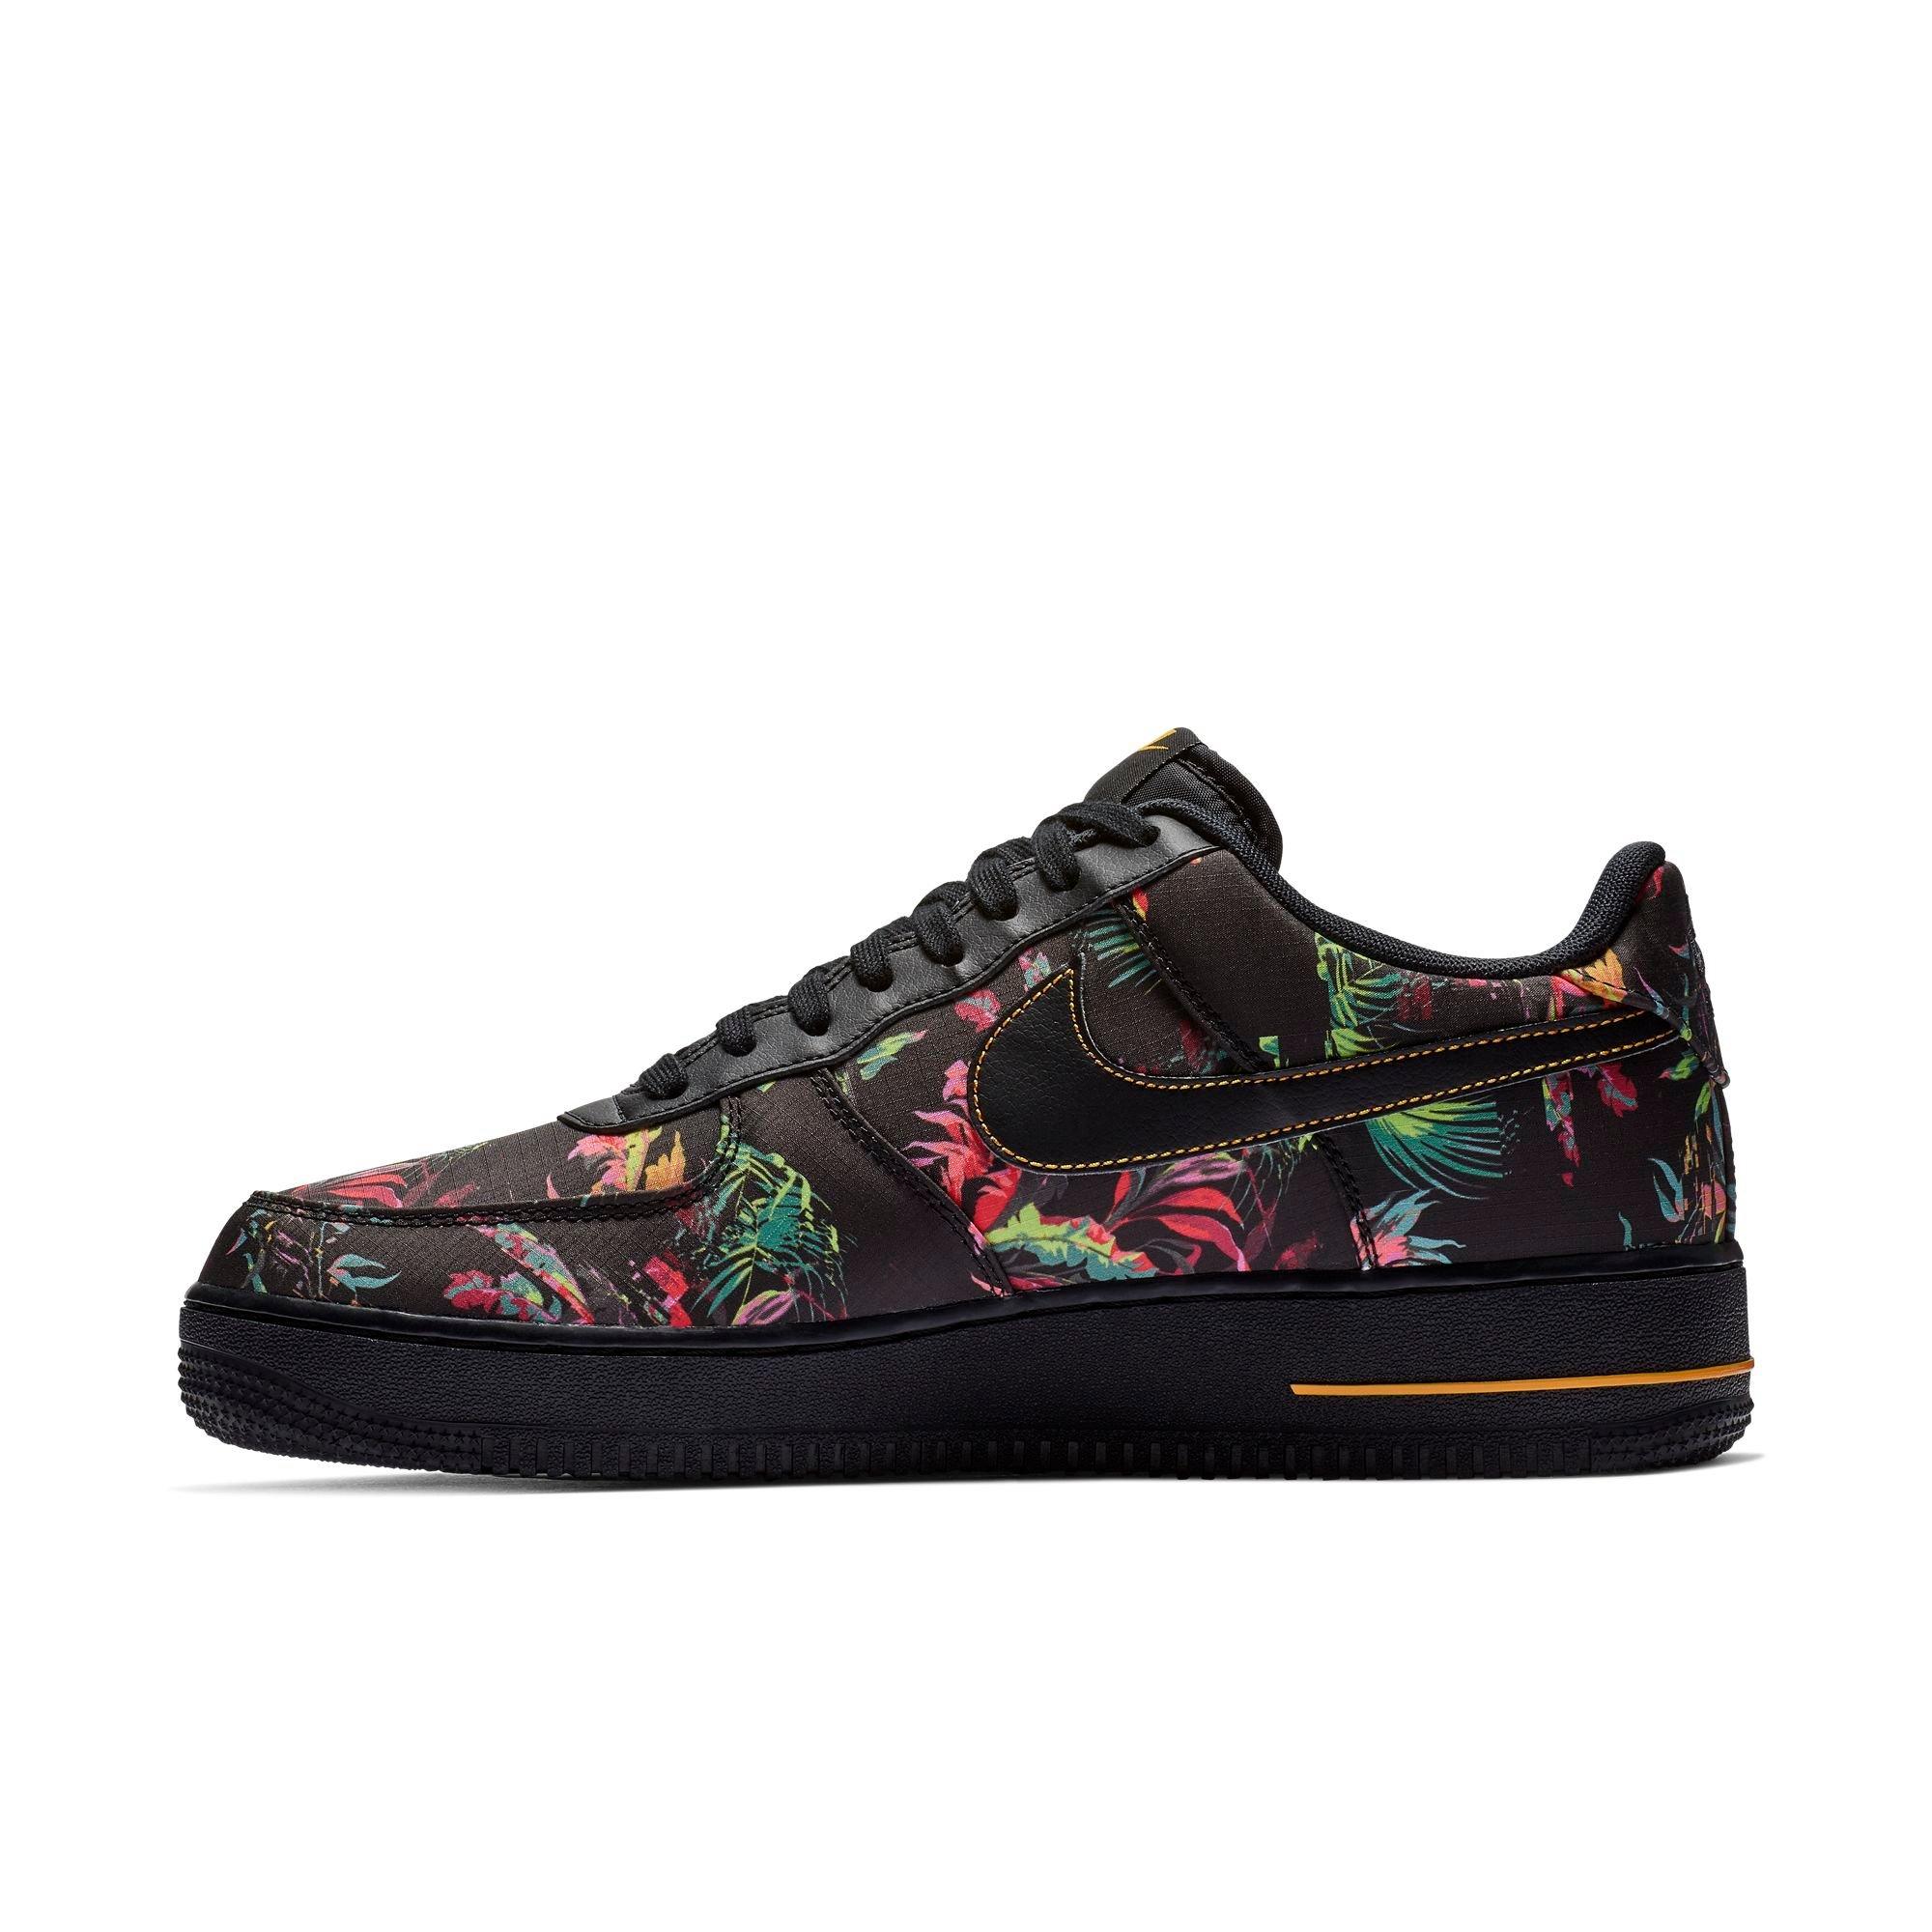 mens nike shoes with flowers